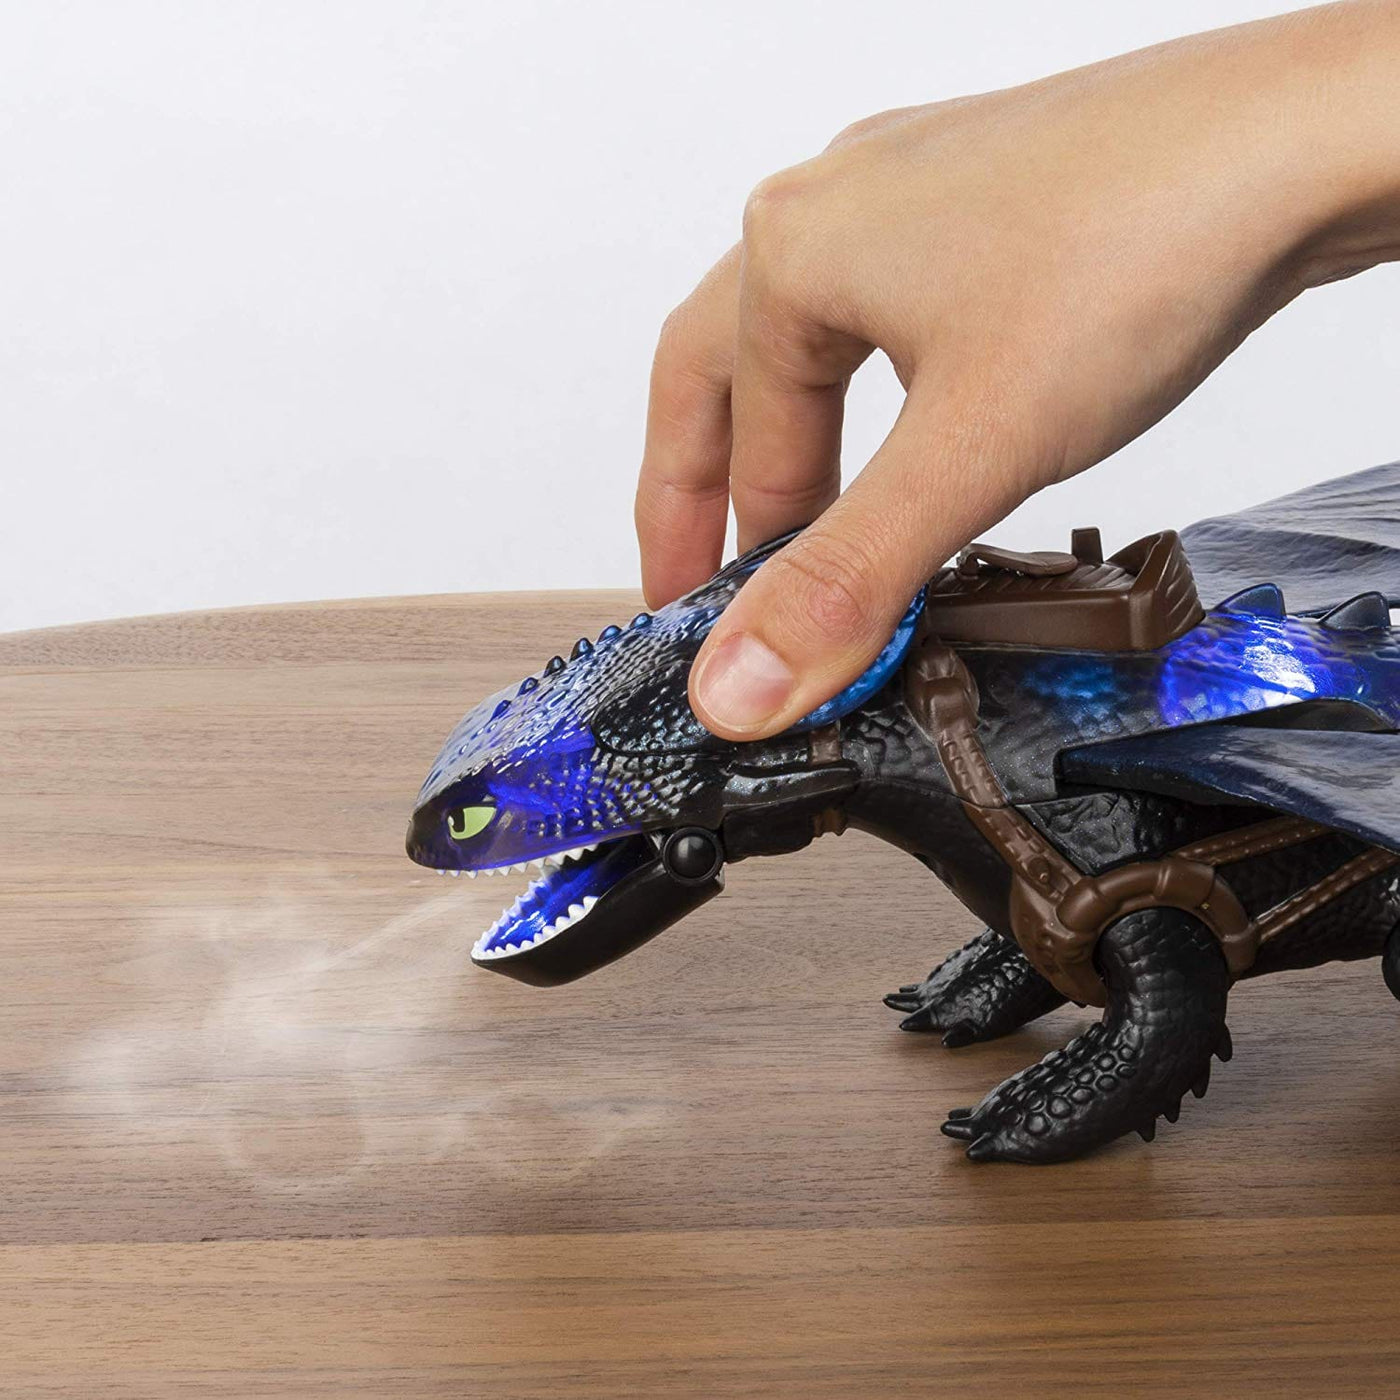 Giant Fire Breathing Toothless | How To Train Your Dragon by Spin Master Toy